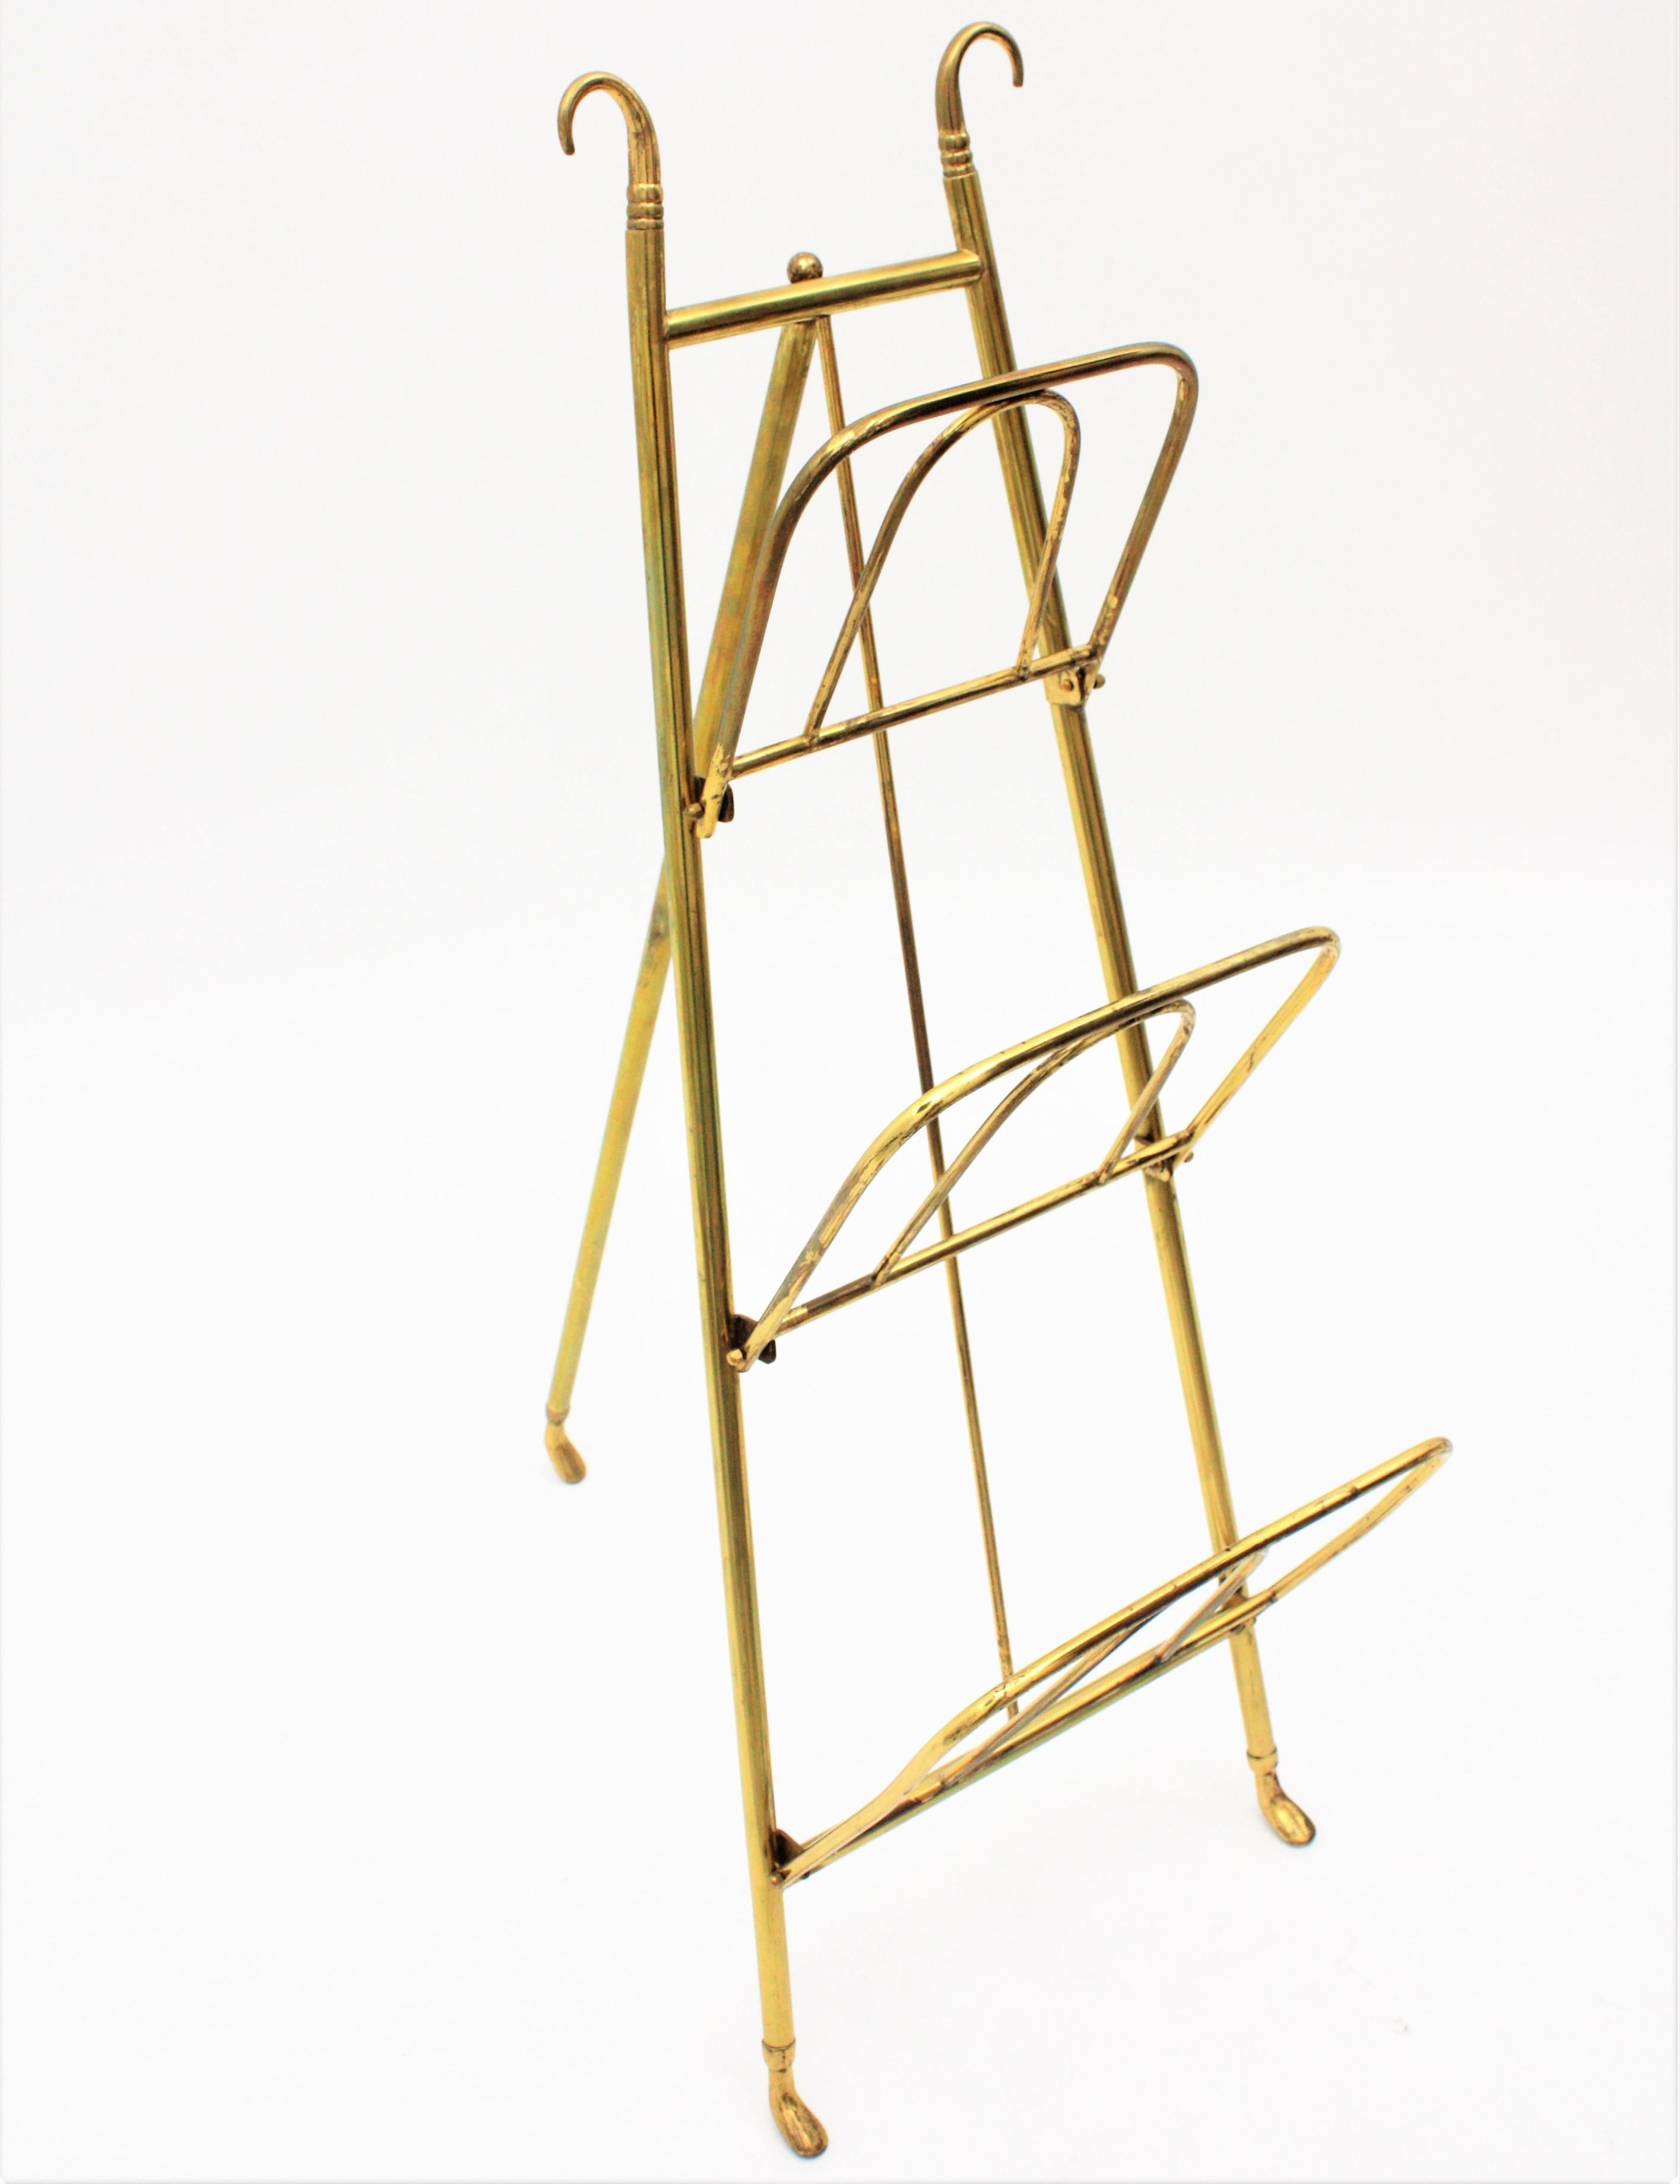 Edwardian polished brass tripod magazine rack with three tiers. It has stylish feet endings at the bottom and hooks endings at the top. 
England, 1910-1920.
Use it as a magazine, book or newspapers rack, easel or towels valet in a powder room. Easy